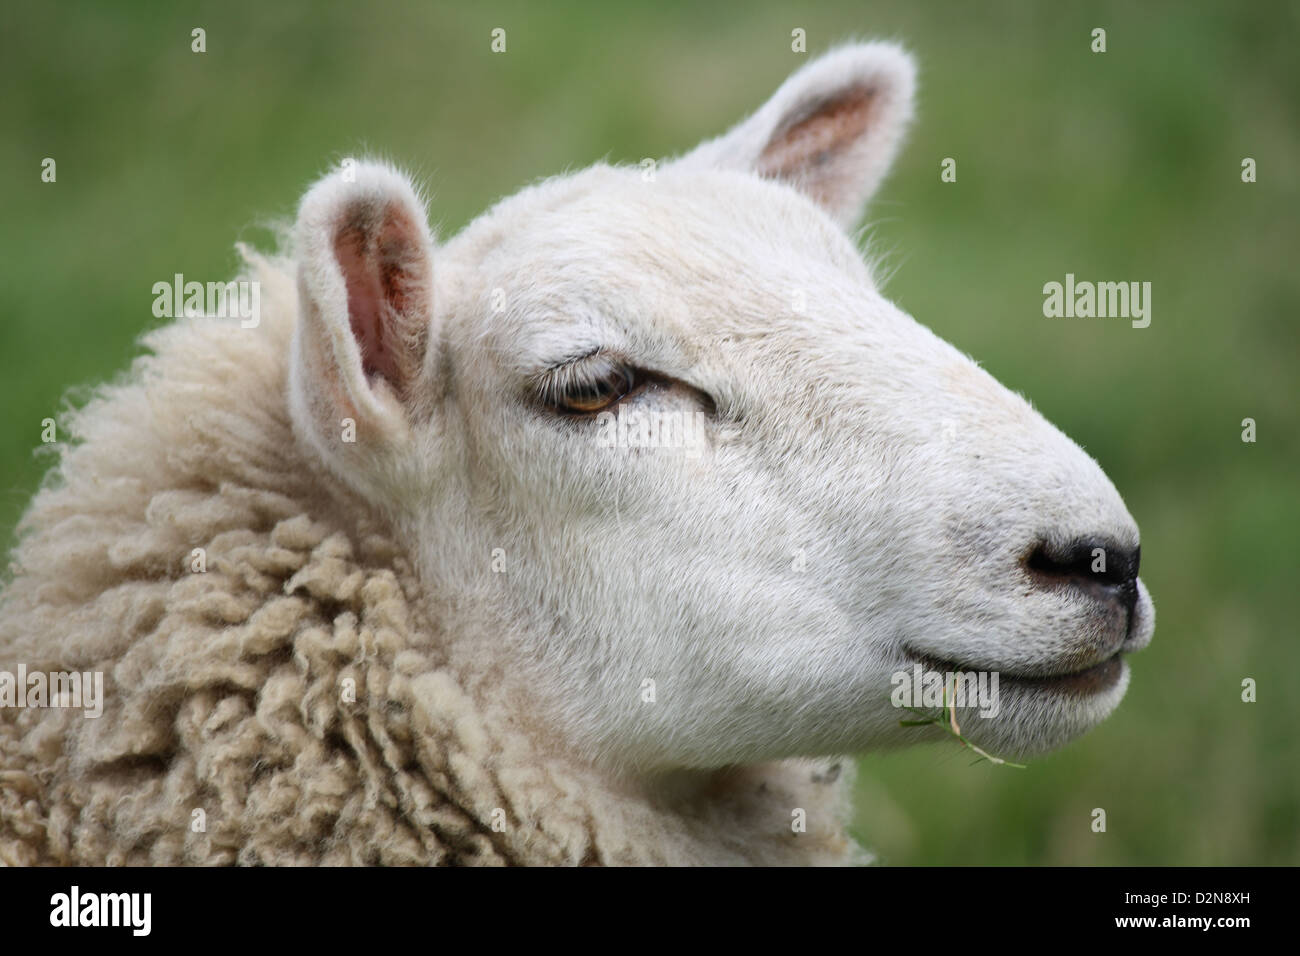 Side profile portrait of a sheep Stock Photo